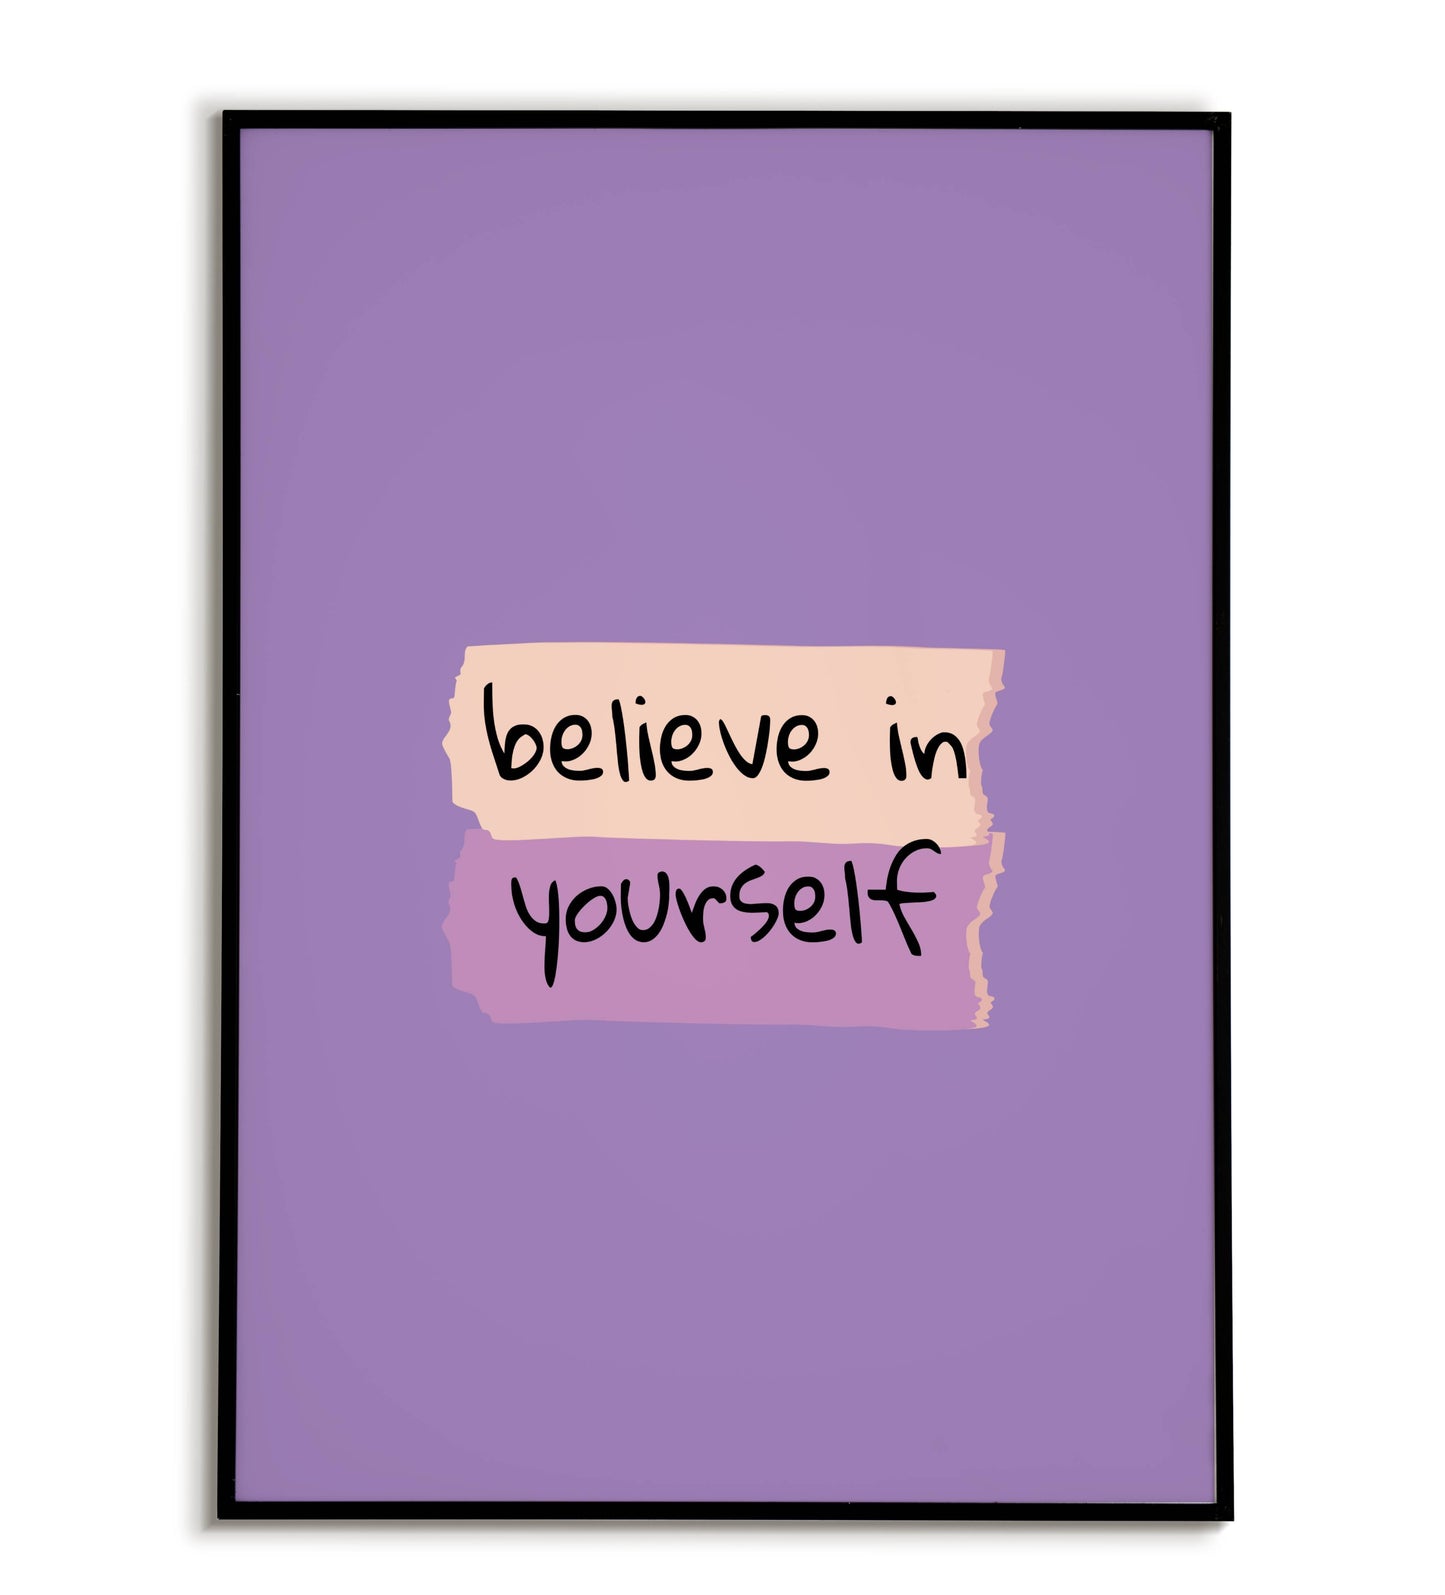 "Believe in yourself" printable inspirational poster.